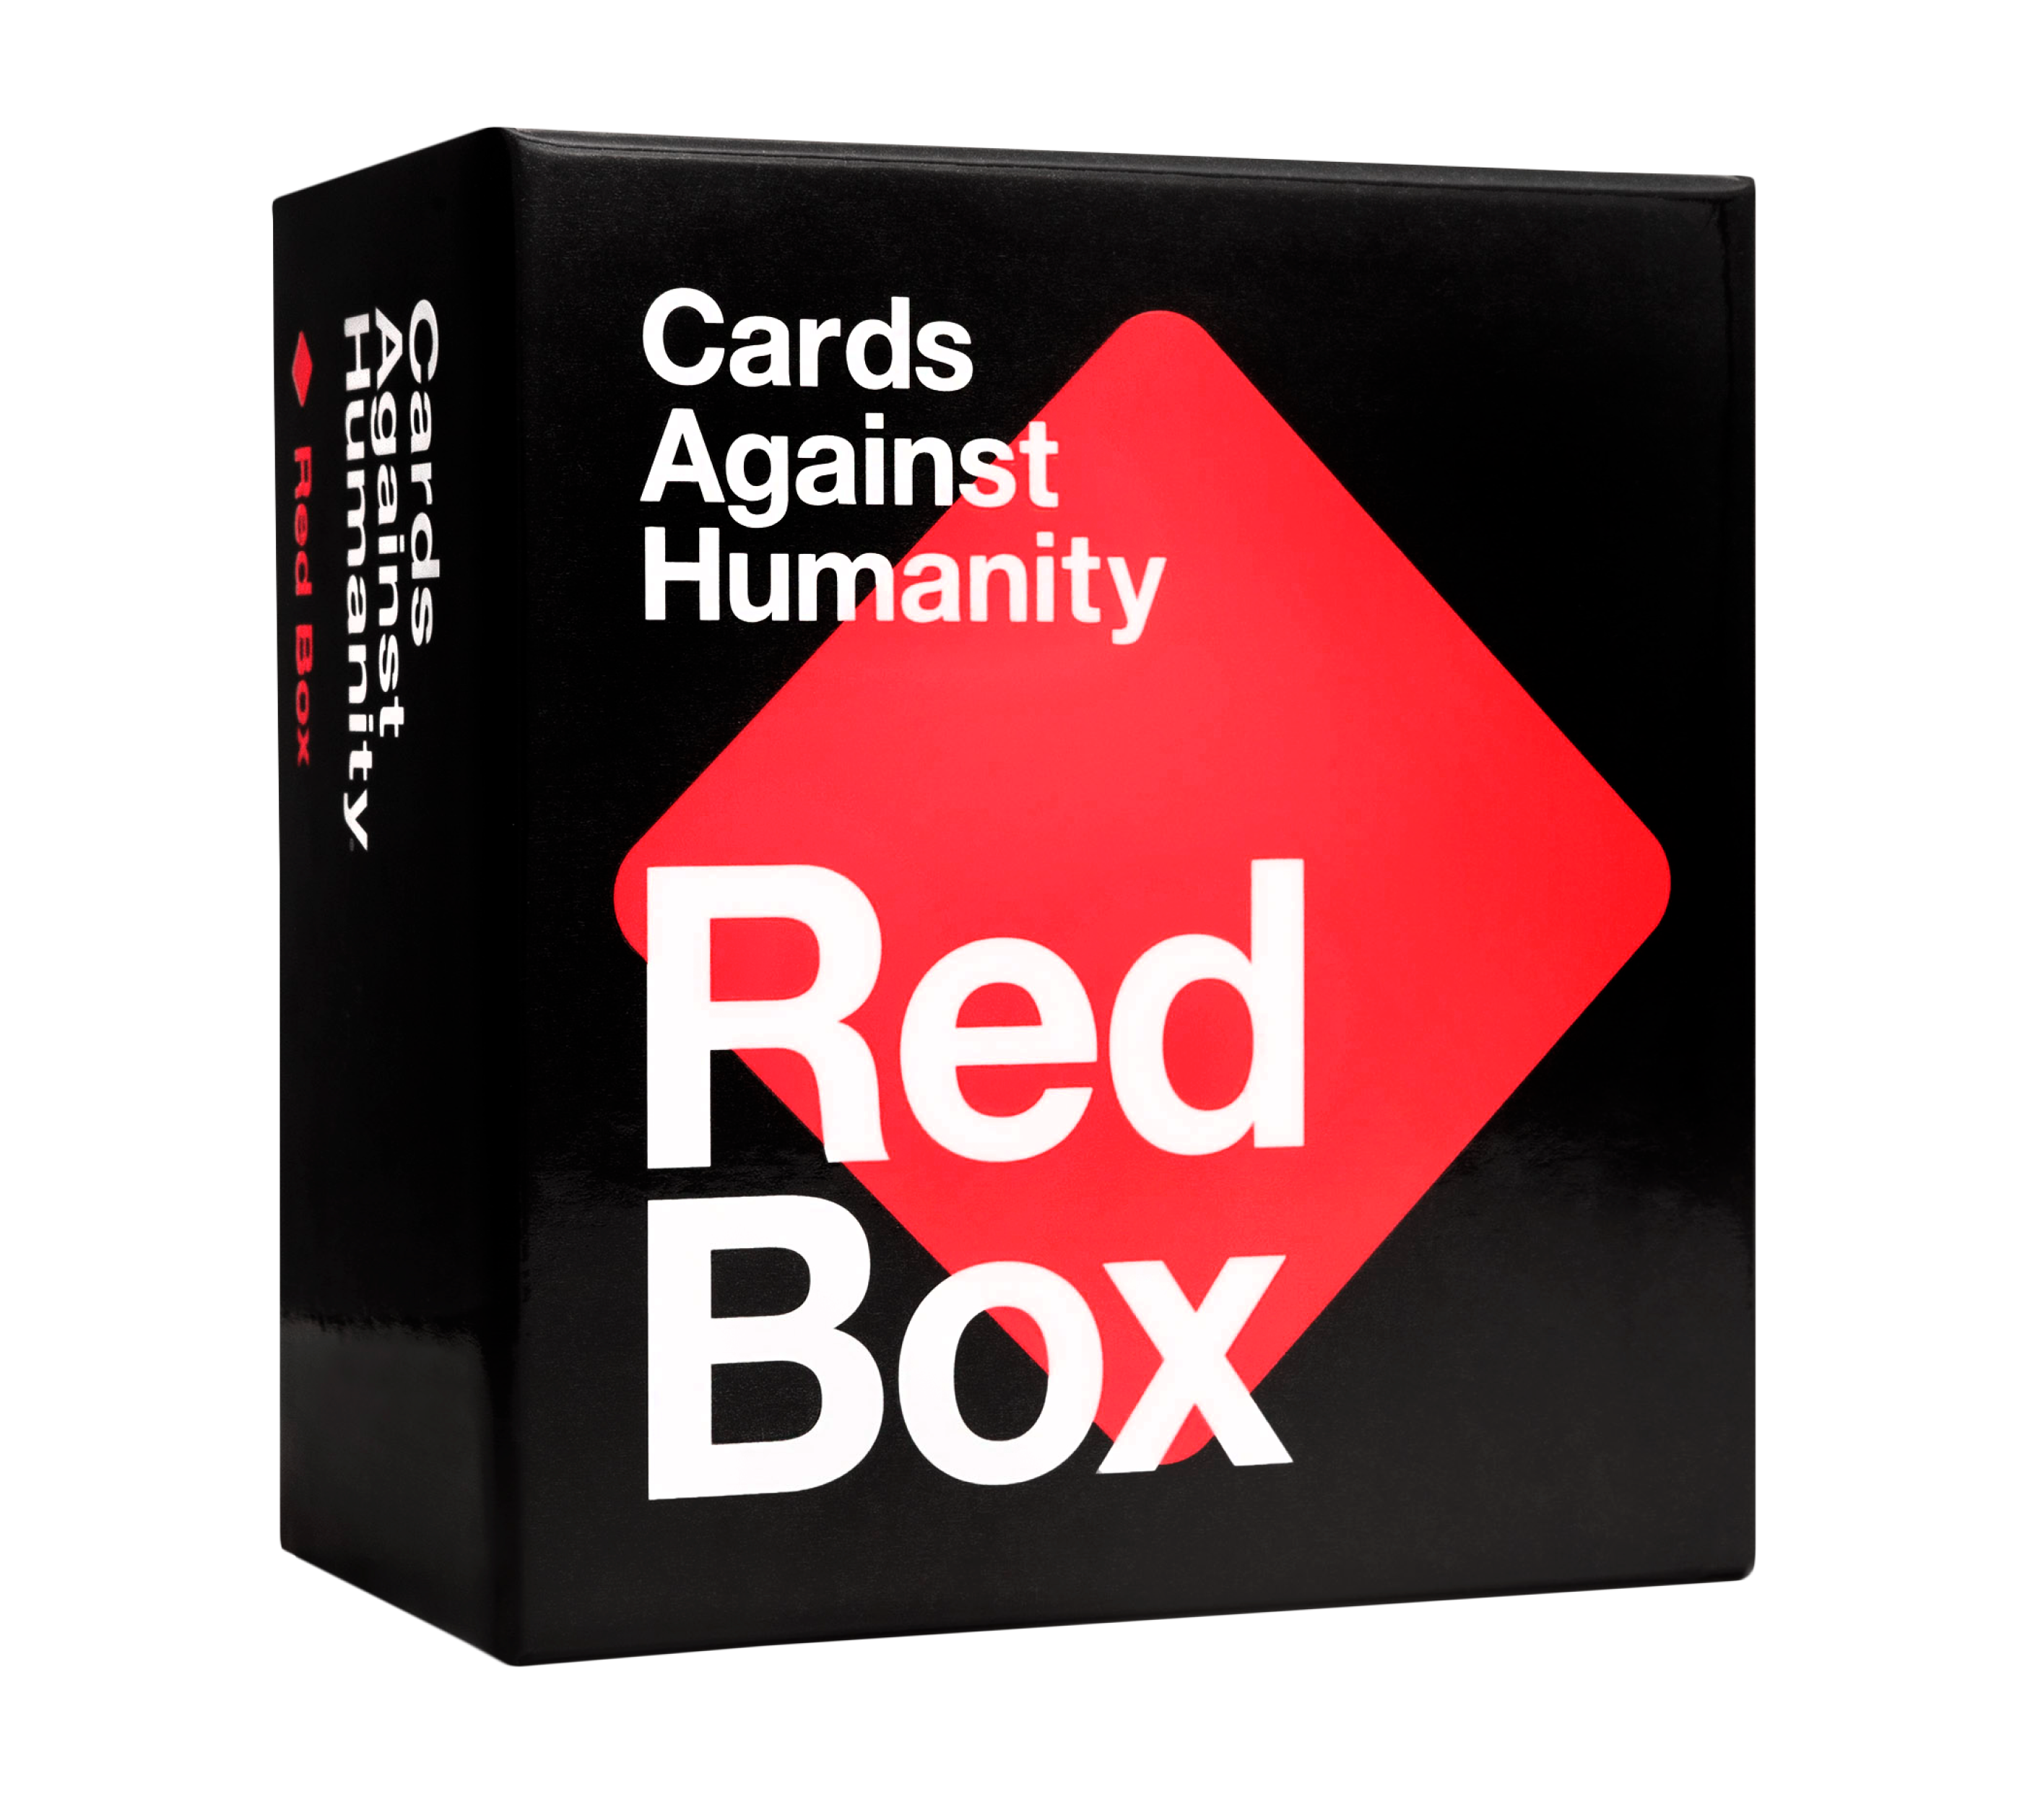 New 817246020699 Everthing Box Cards Against Humanity Cards Against Humanity 300 More Cards To Add To Your Deck 